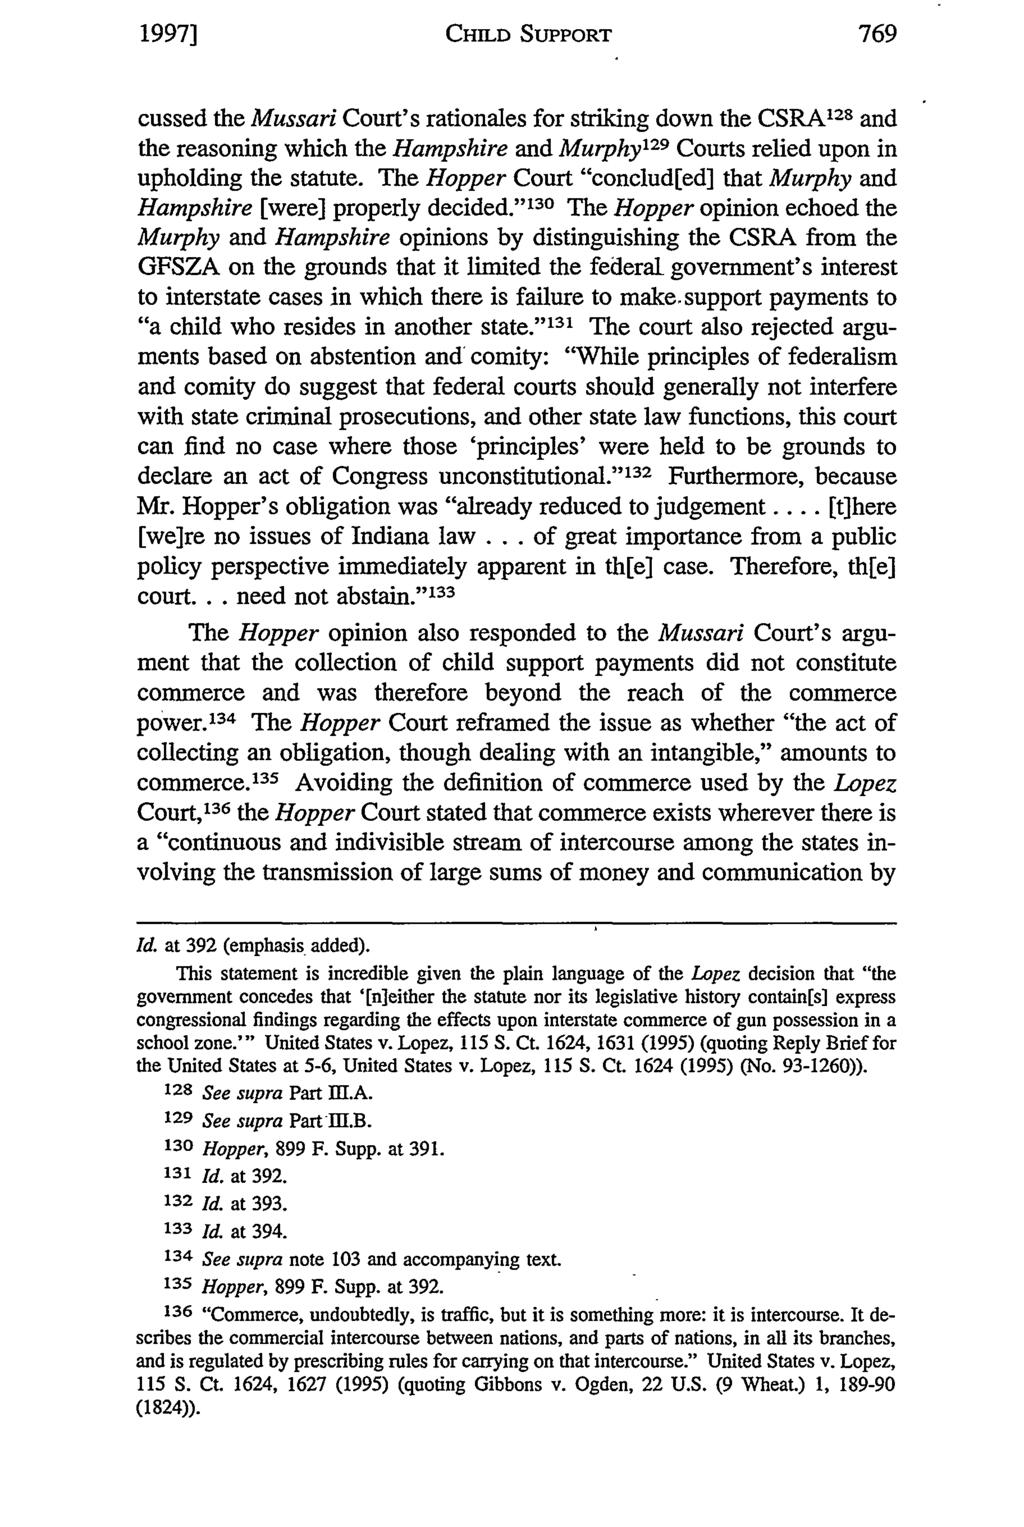 1997] CHILD SUPPORT cussed the Mussari Court's rationales for striking down the CSRA 128 and the reasoning which the Hampshire and Murphy 129 Courts relied upon in upholding the statute.